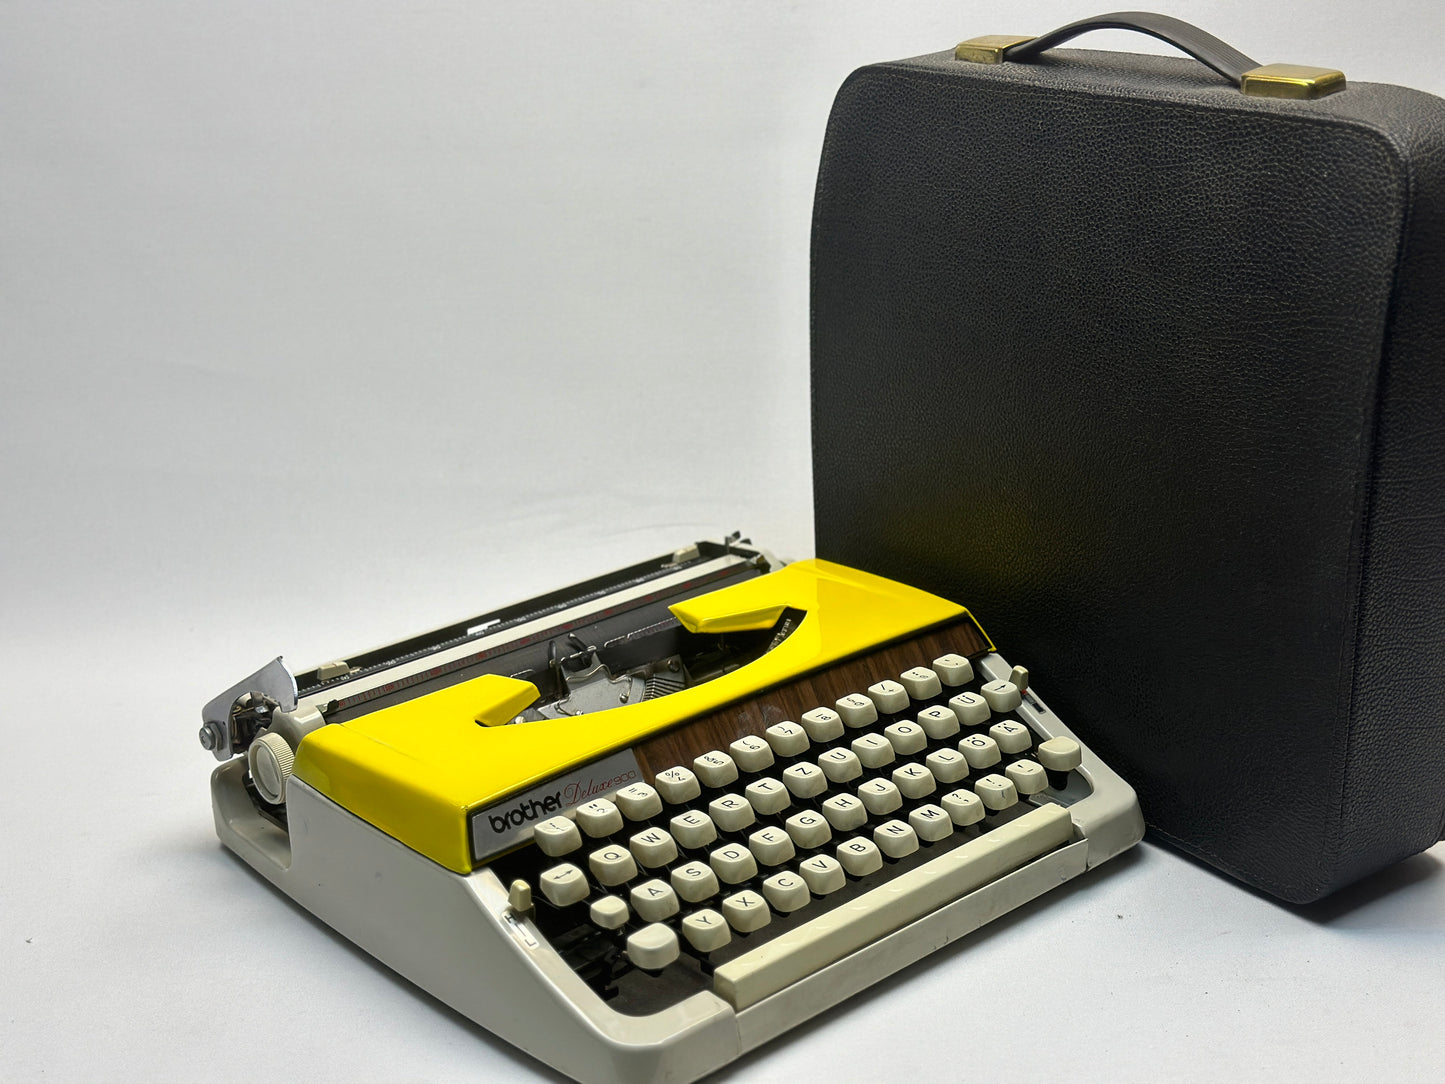 Discover Vintage Splendor with the Yellow Olympia Deluxe Typewriter - German-Made, Antique Treasure